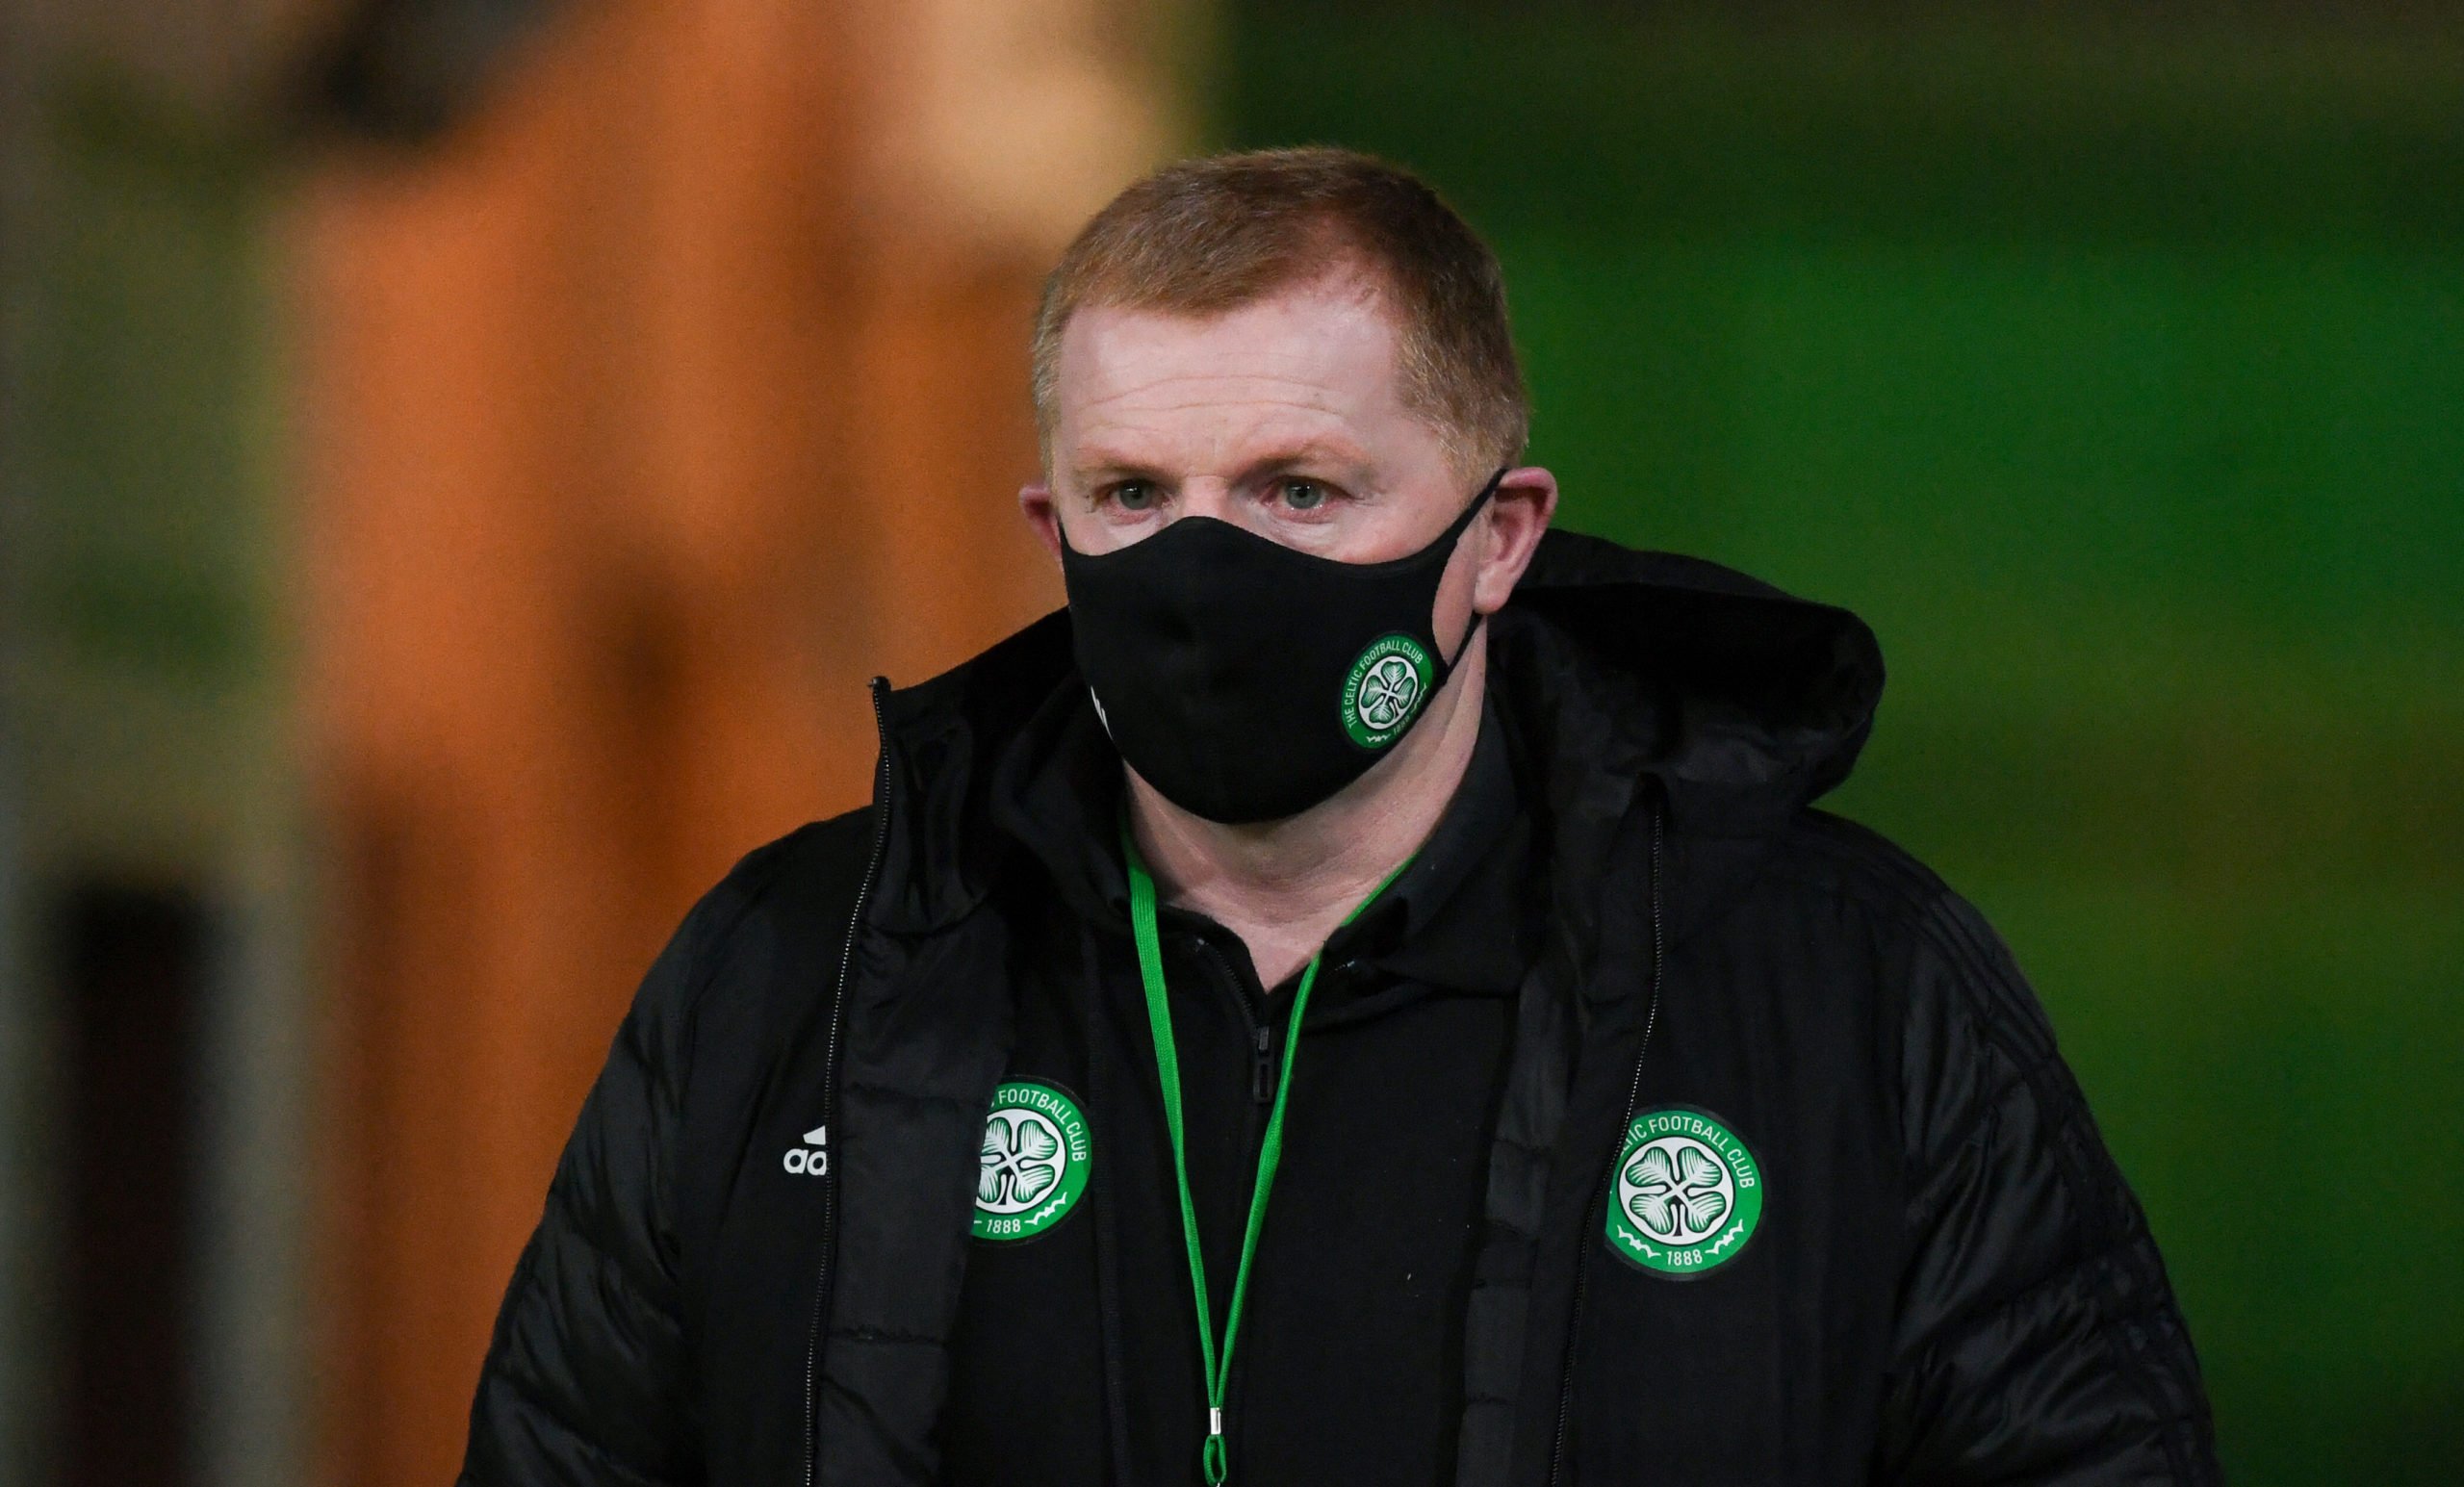 A former player of Neil Lennon says it's time for him to leave Celtic